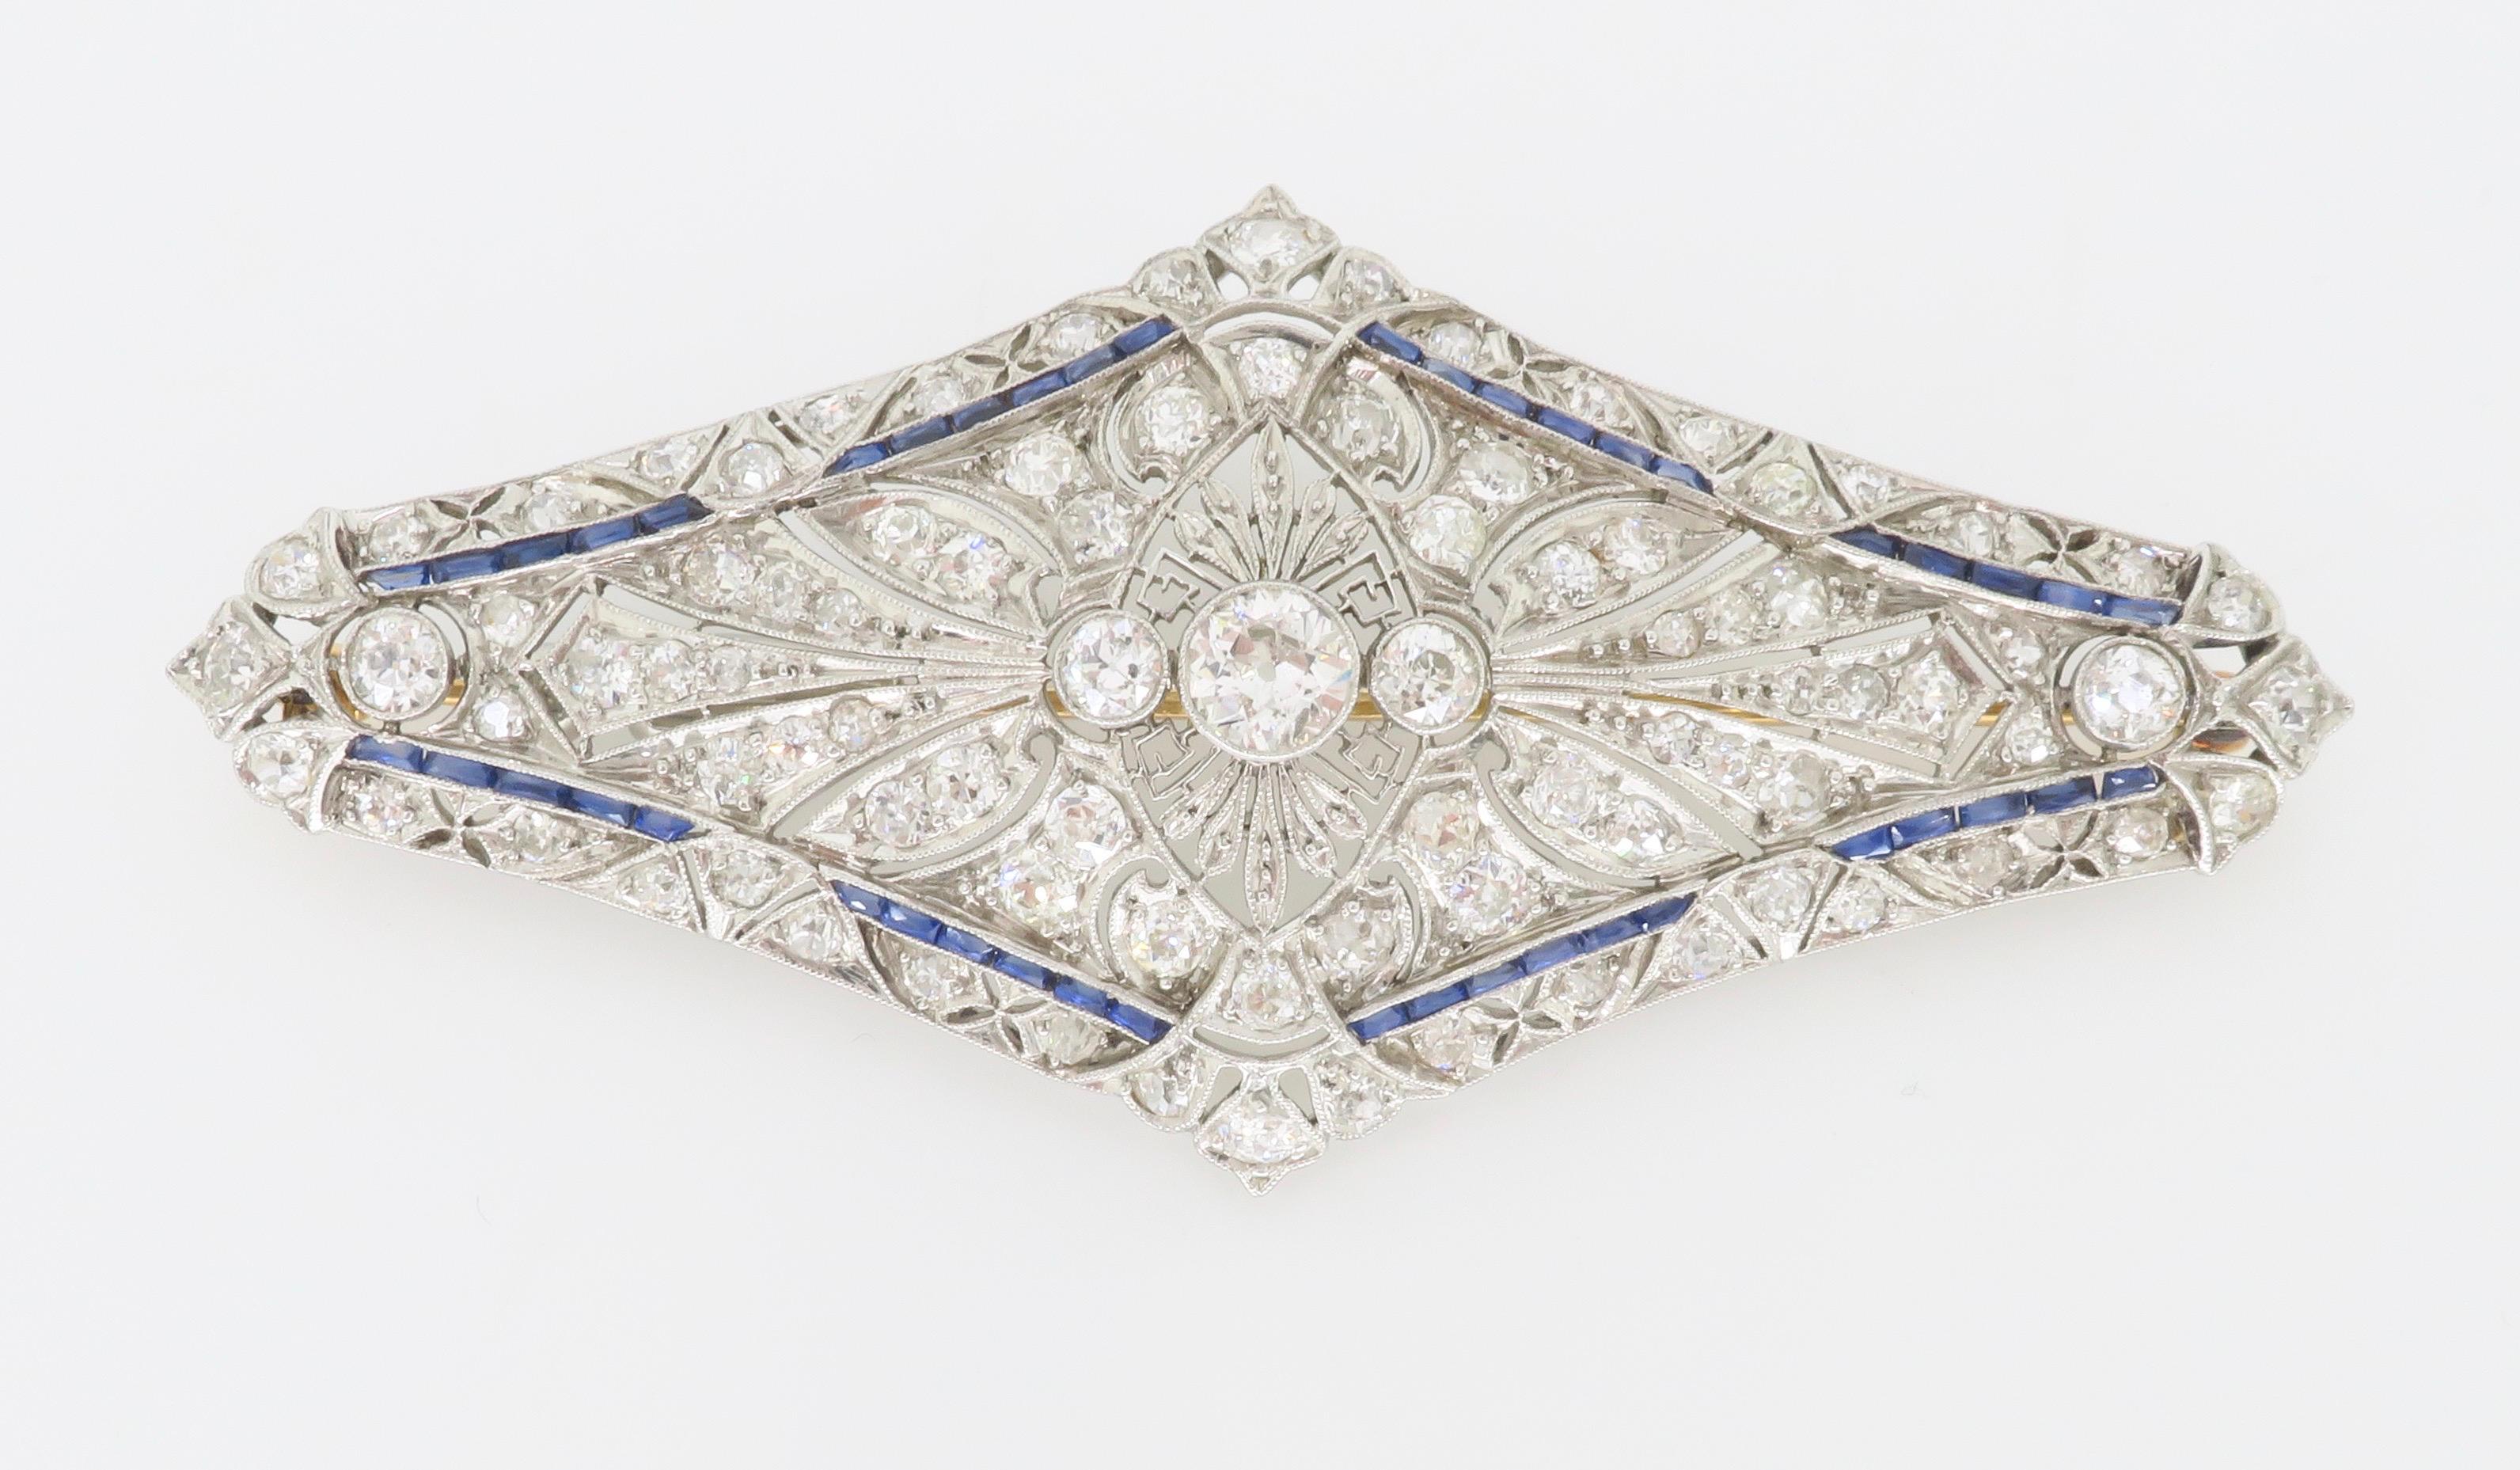 Vintage Diamond & Blue Sapphire brooch made in intricate Platinum with an 18k yellow gold pin. 

Diamond Carat Weight: Approximately 4.88CTW
Diamond Cut: Old European Cut Diamonds 
Color: Average E-F
Clarity: Average VS
Metal: Platinum & 18k Yellow